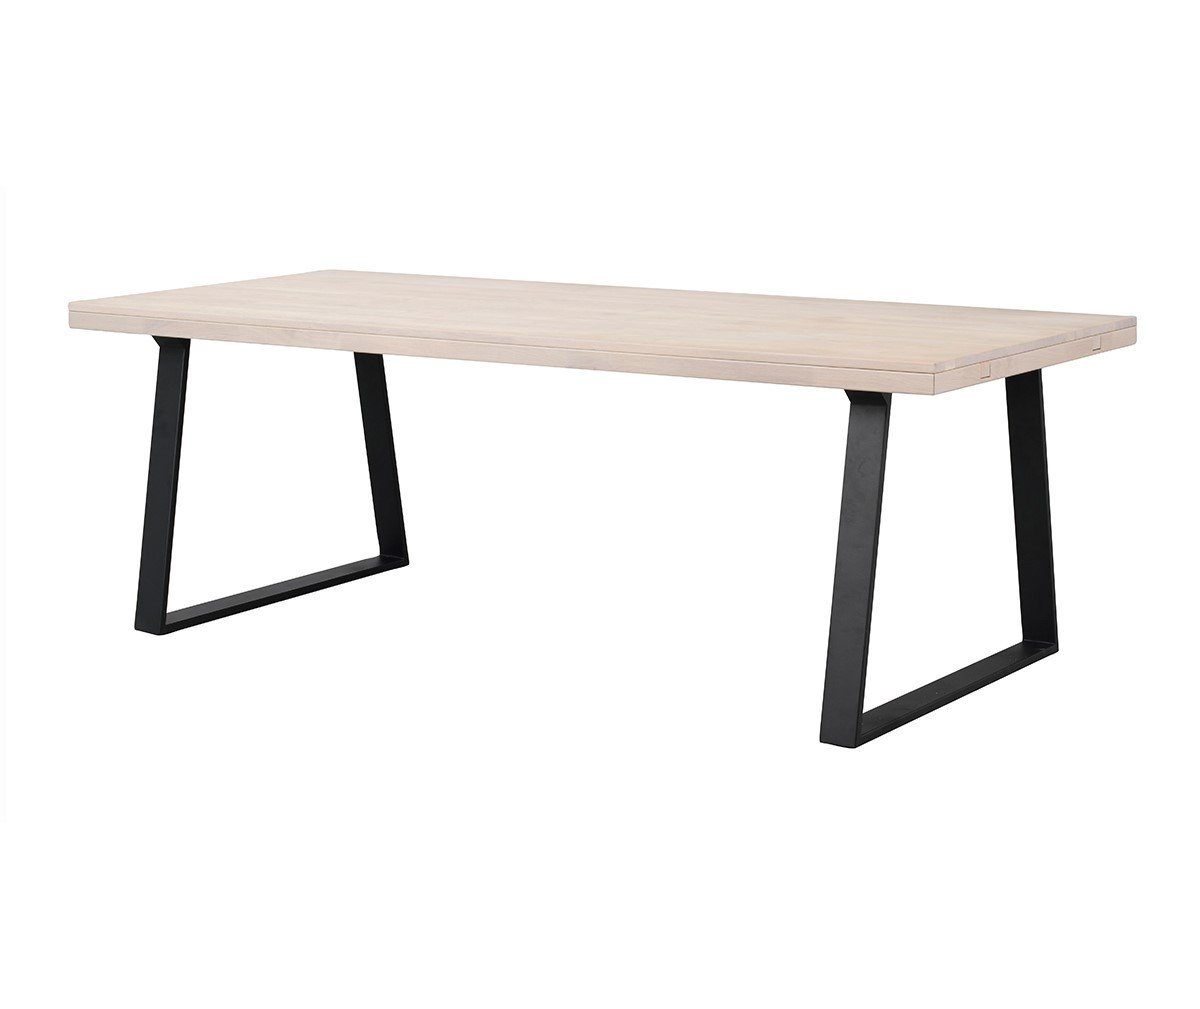 Rowico Brooklyn Extendable Dining Table White Oiled Oak / Metal, 95 x 220 cm